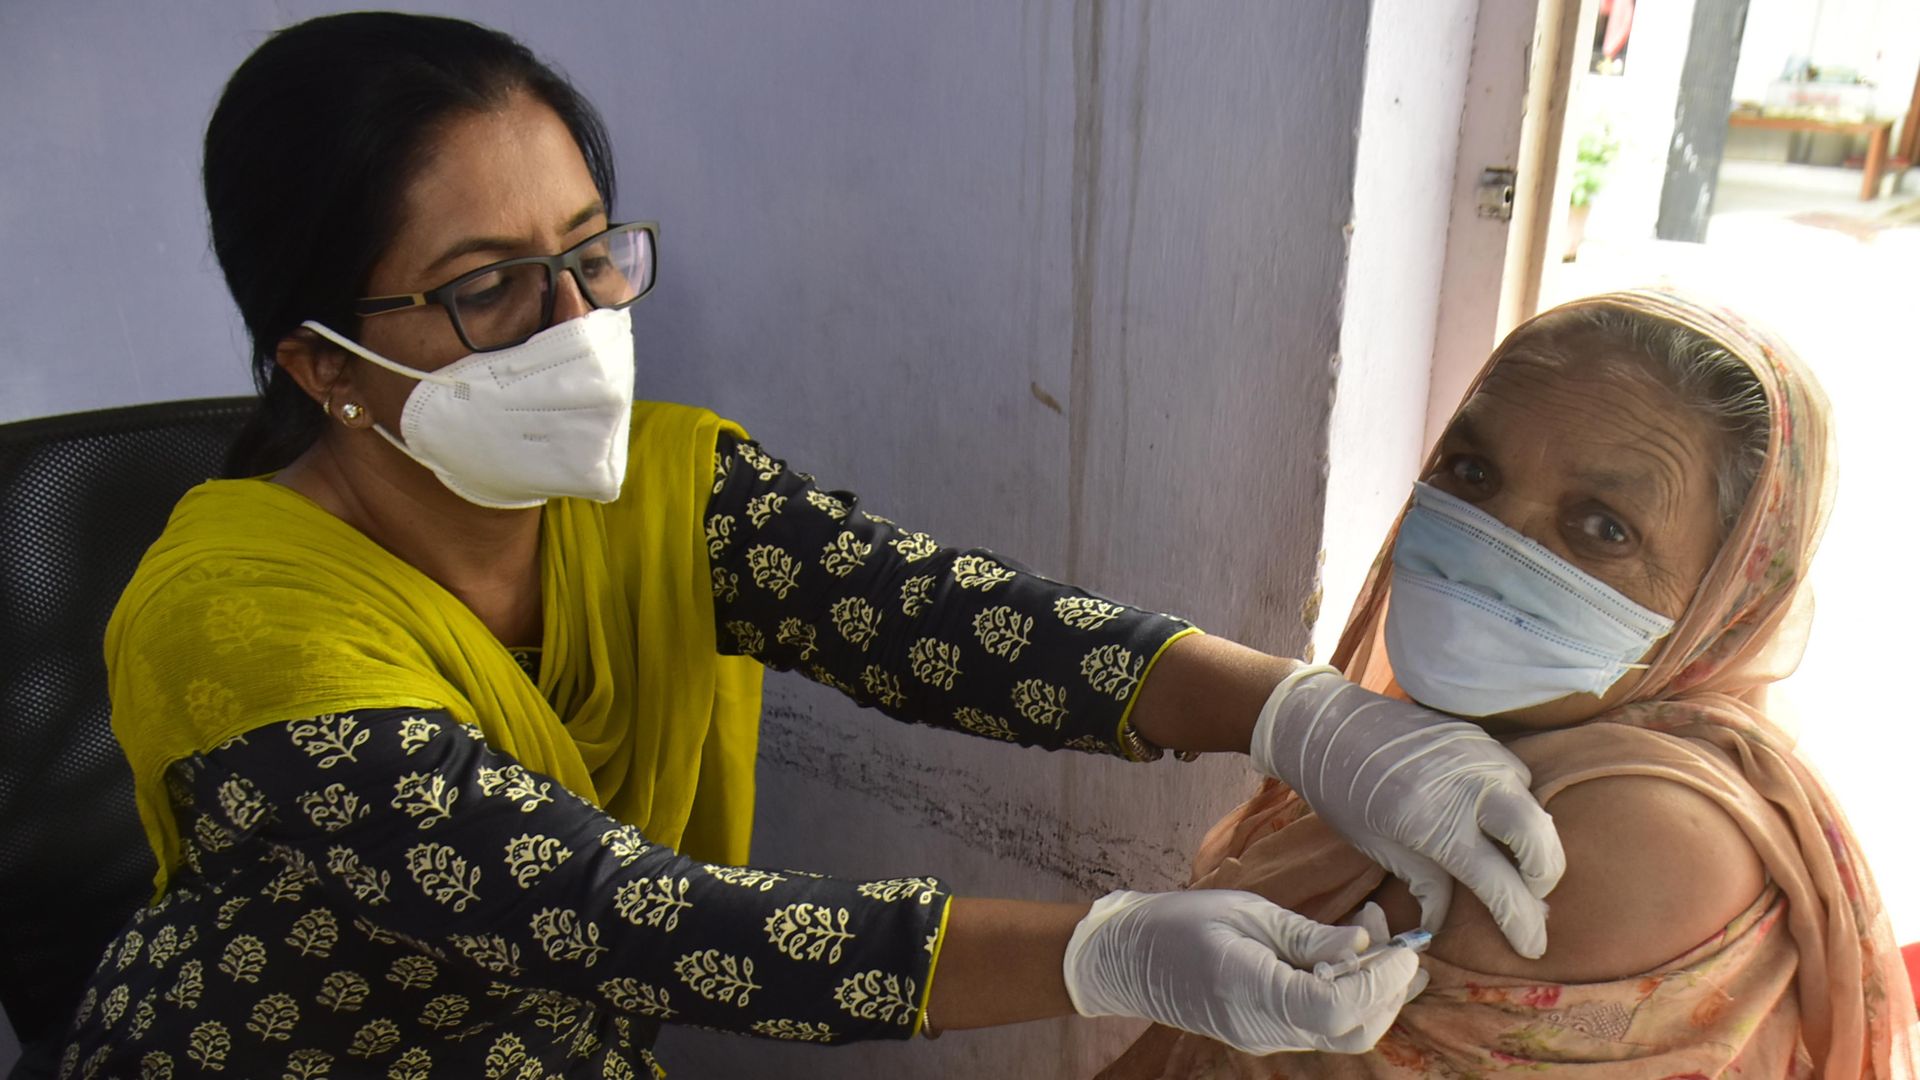 A healthcare worker administering a coronavirus vaccine in Amritsar, India, on April 15.